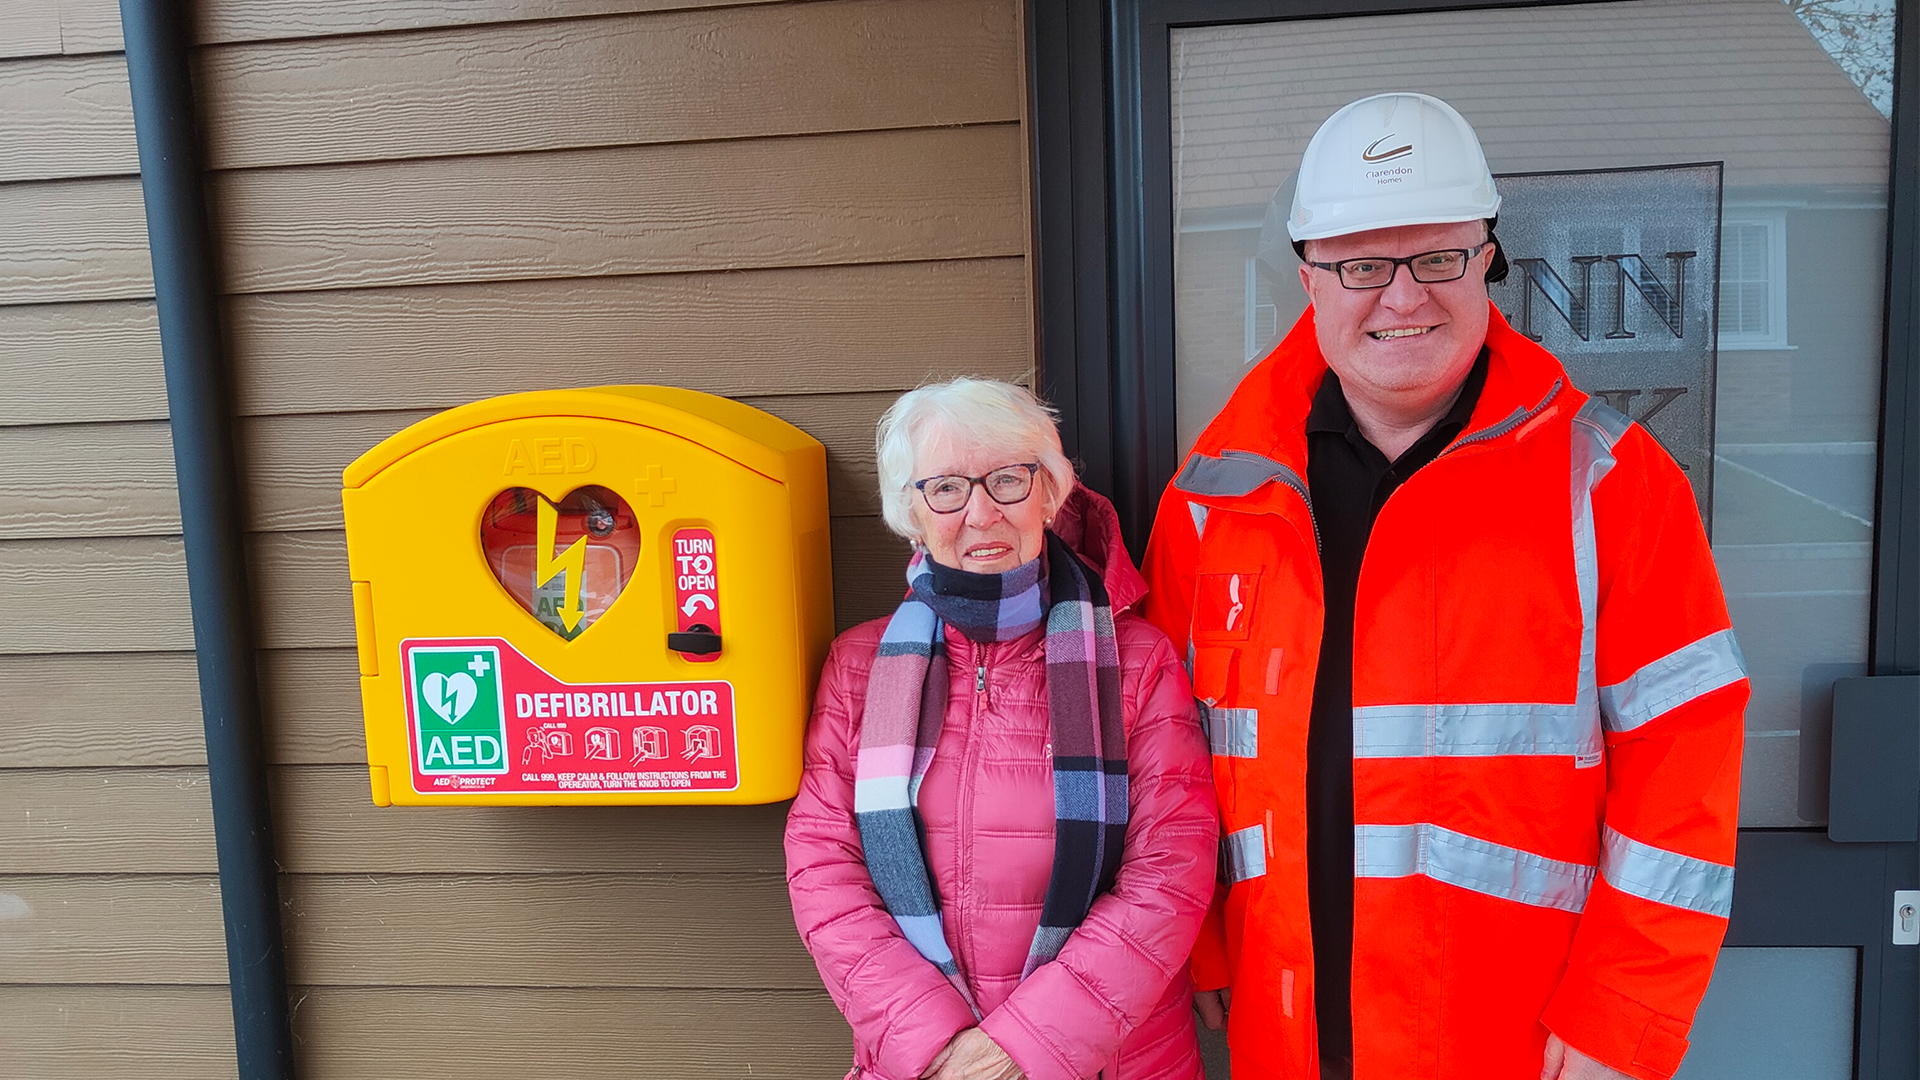 A man in a hi vis and an elderly woman stand next to a defibrillator